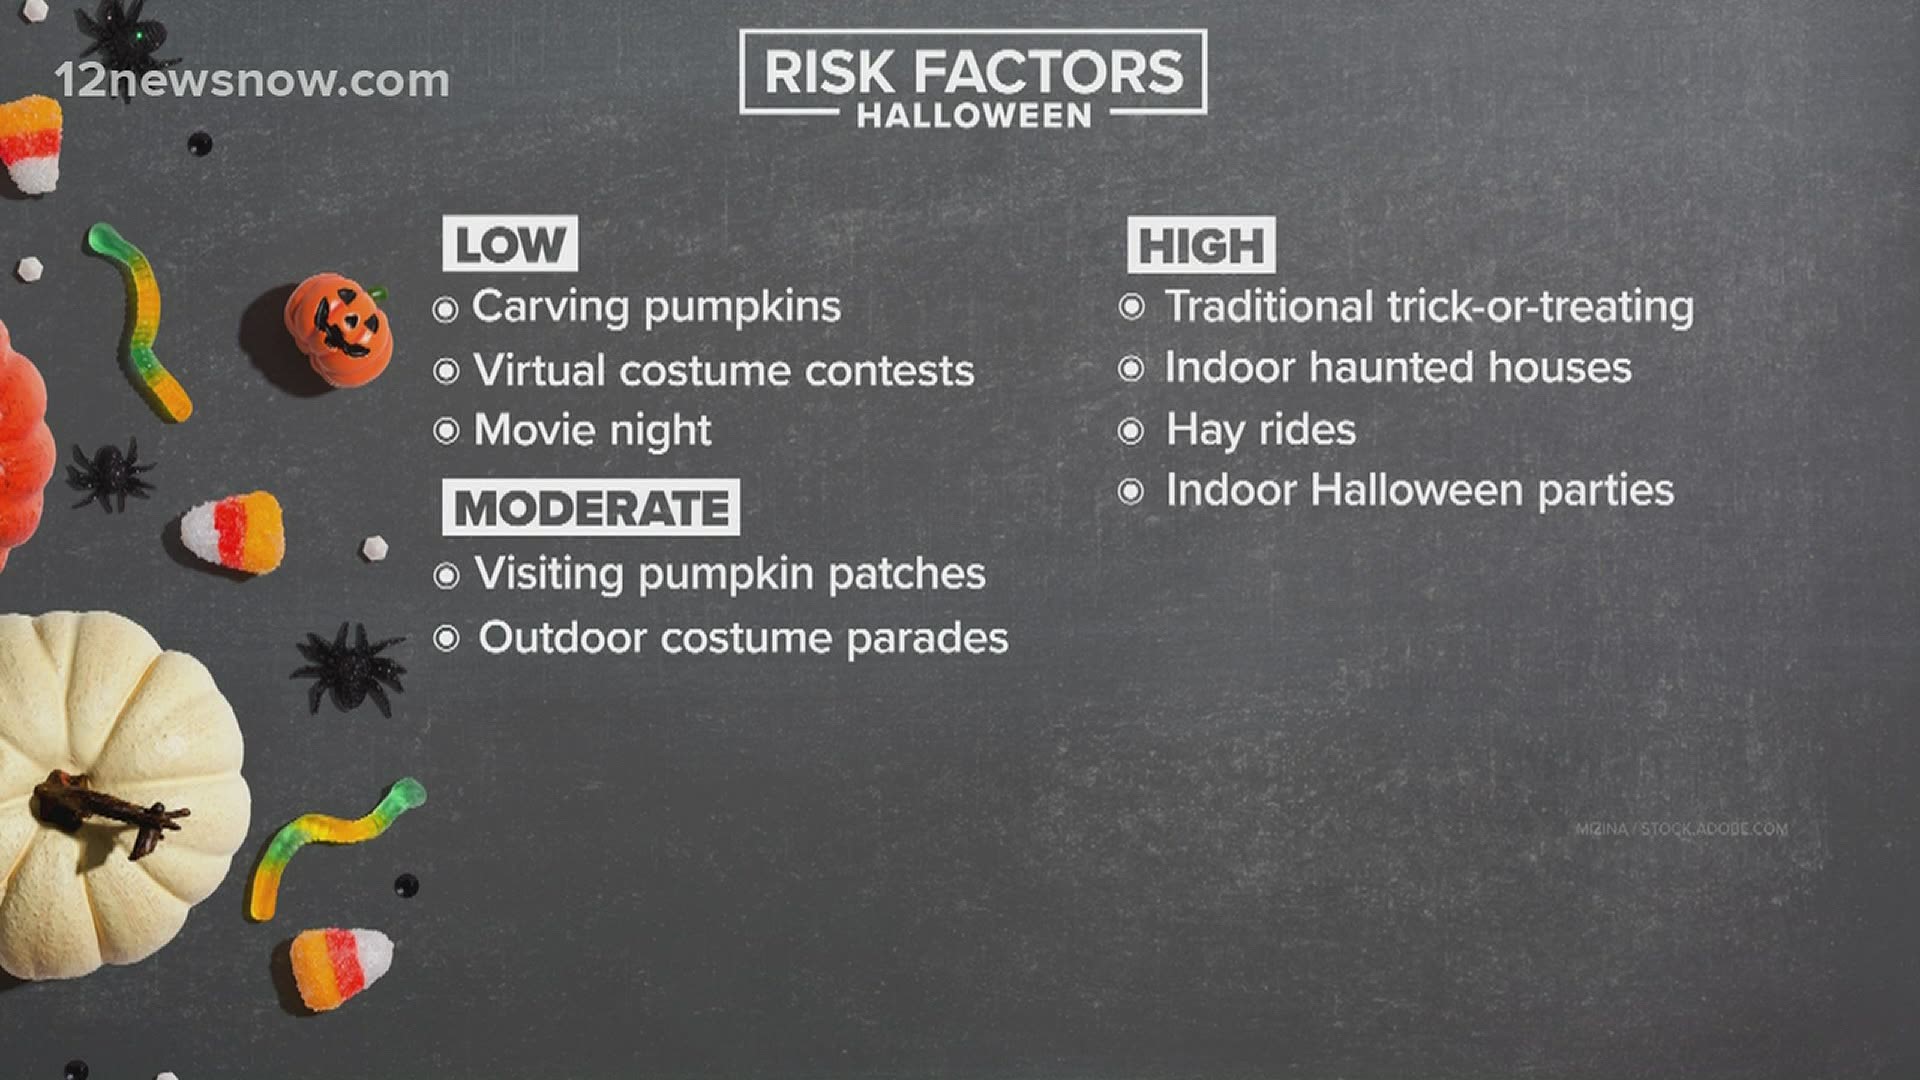 Door-to-door trick-or-treating is seen as a "high-risk activity," so the CDC has suggested several ways to modify Halloween plans this year due to coronavirus.